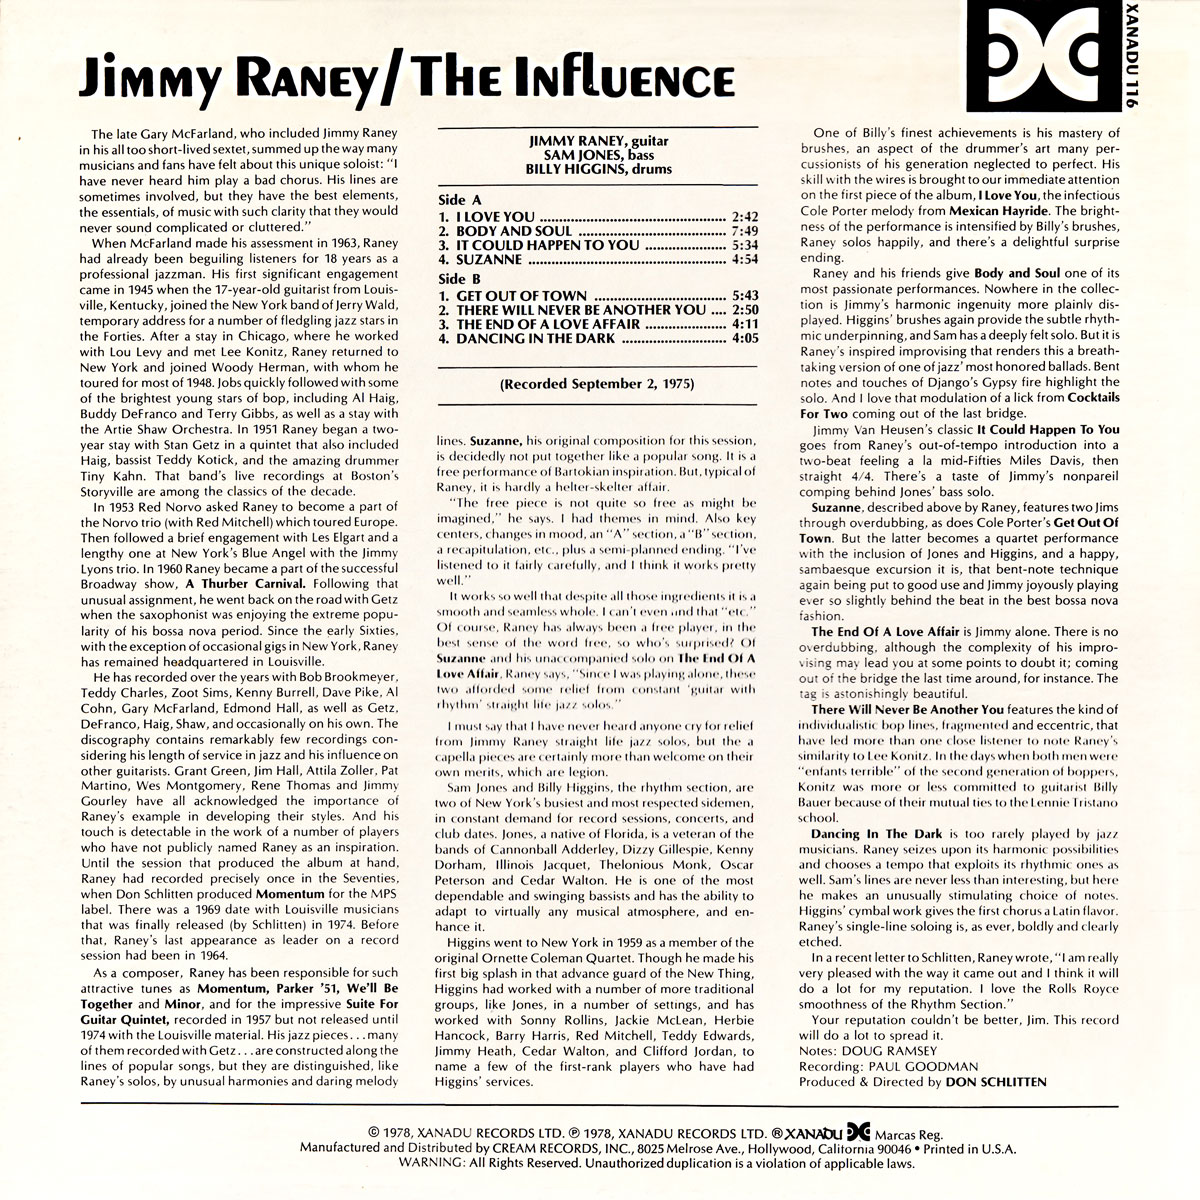 Jimmy Raney - The Influence - Back cover